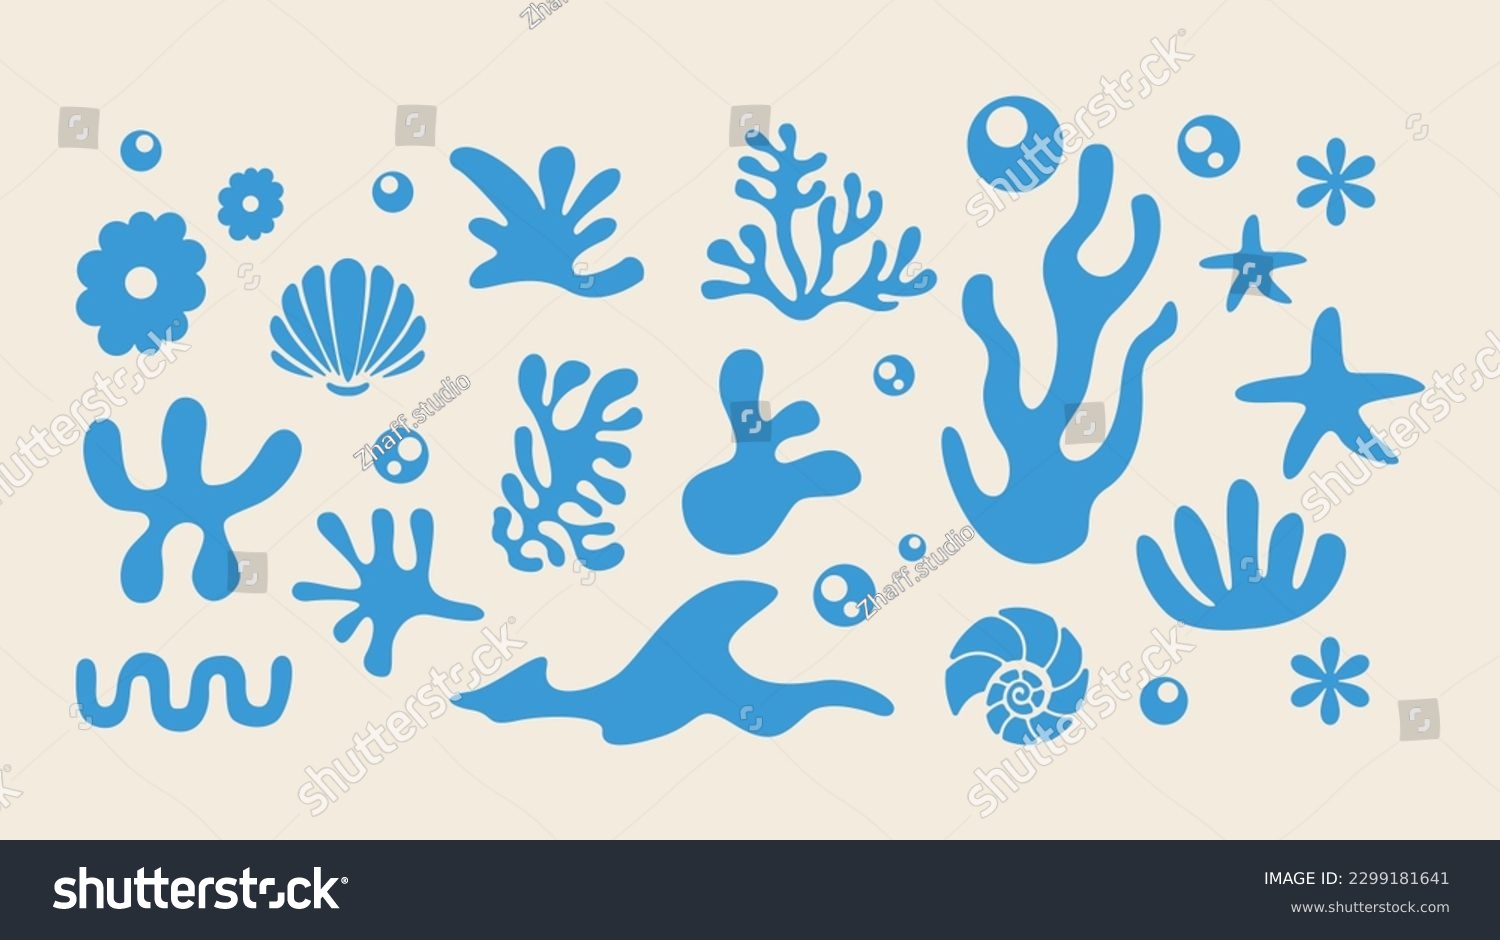 Marine life illustration pattern vector corral, shell, scallop, starfish, deep sea background layout silhouette printable #2299181641